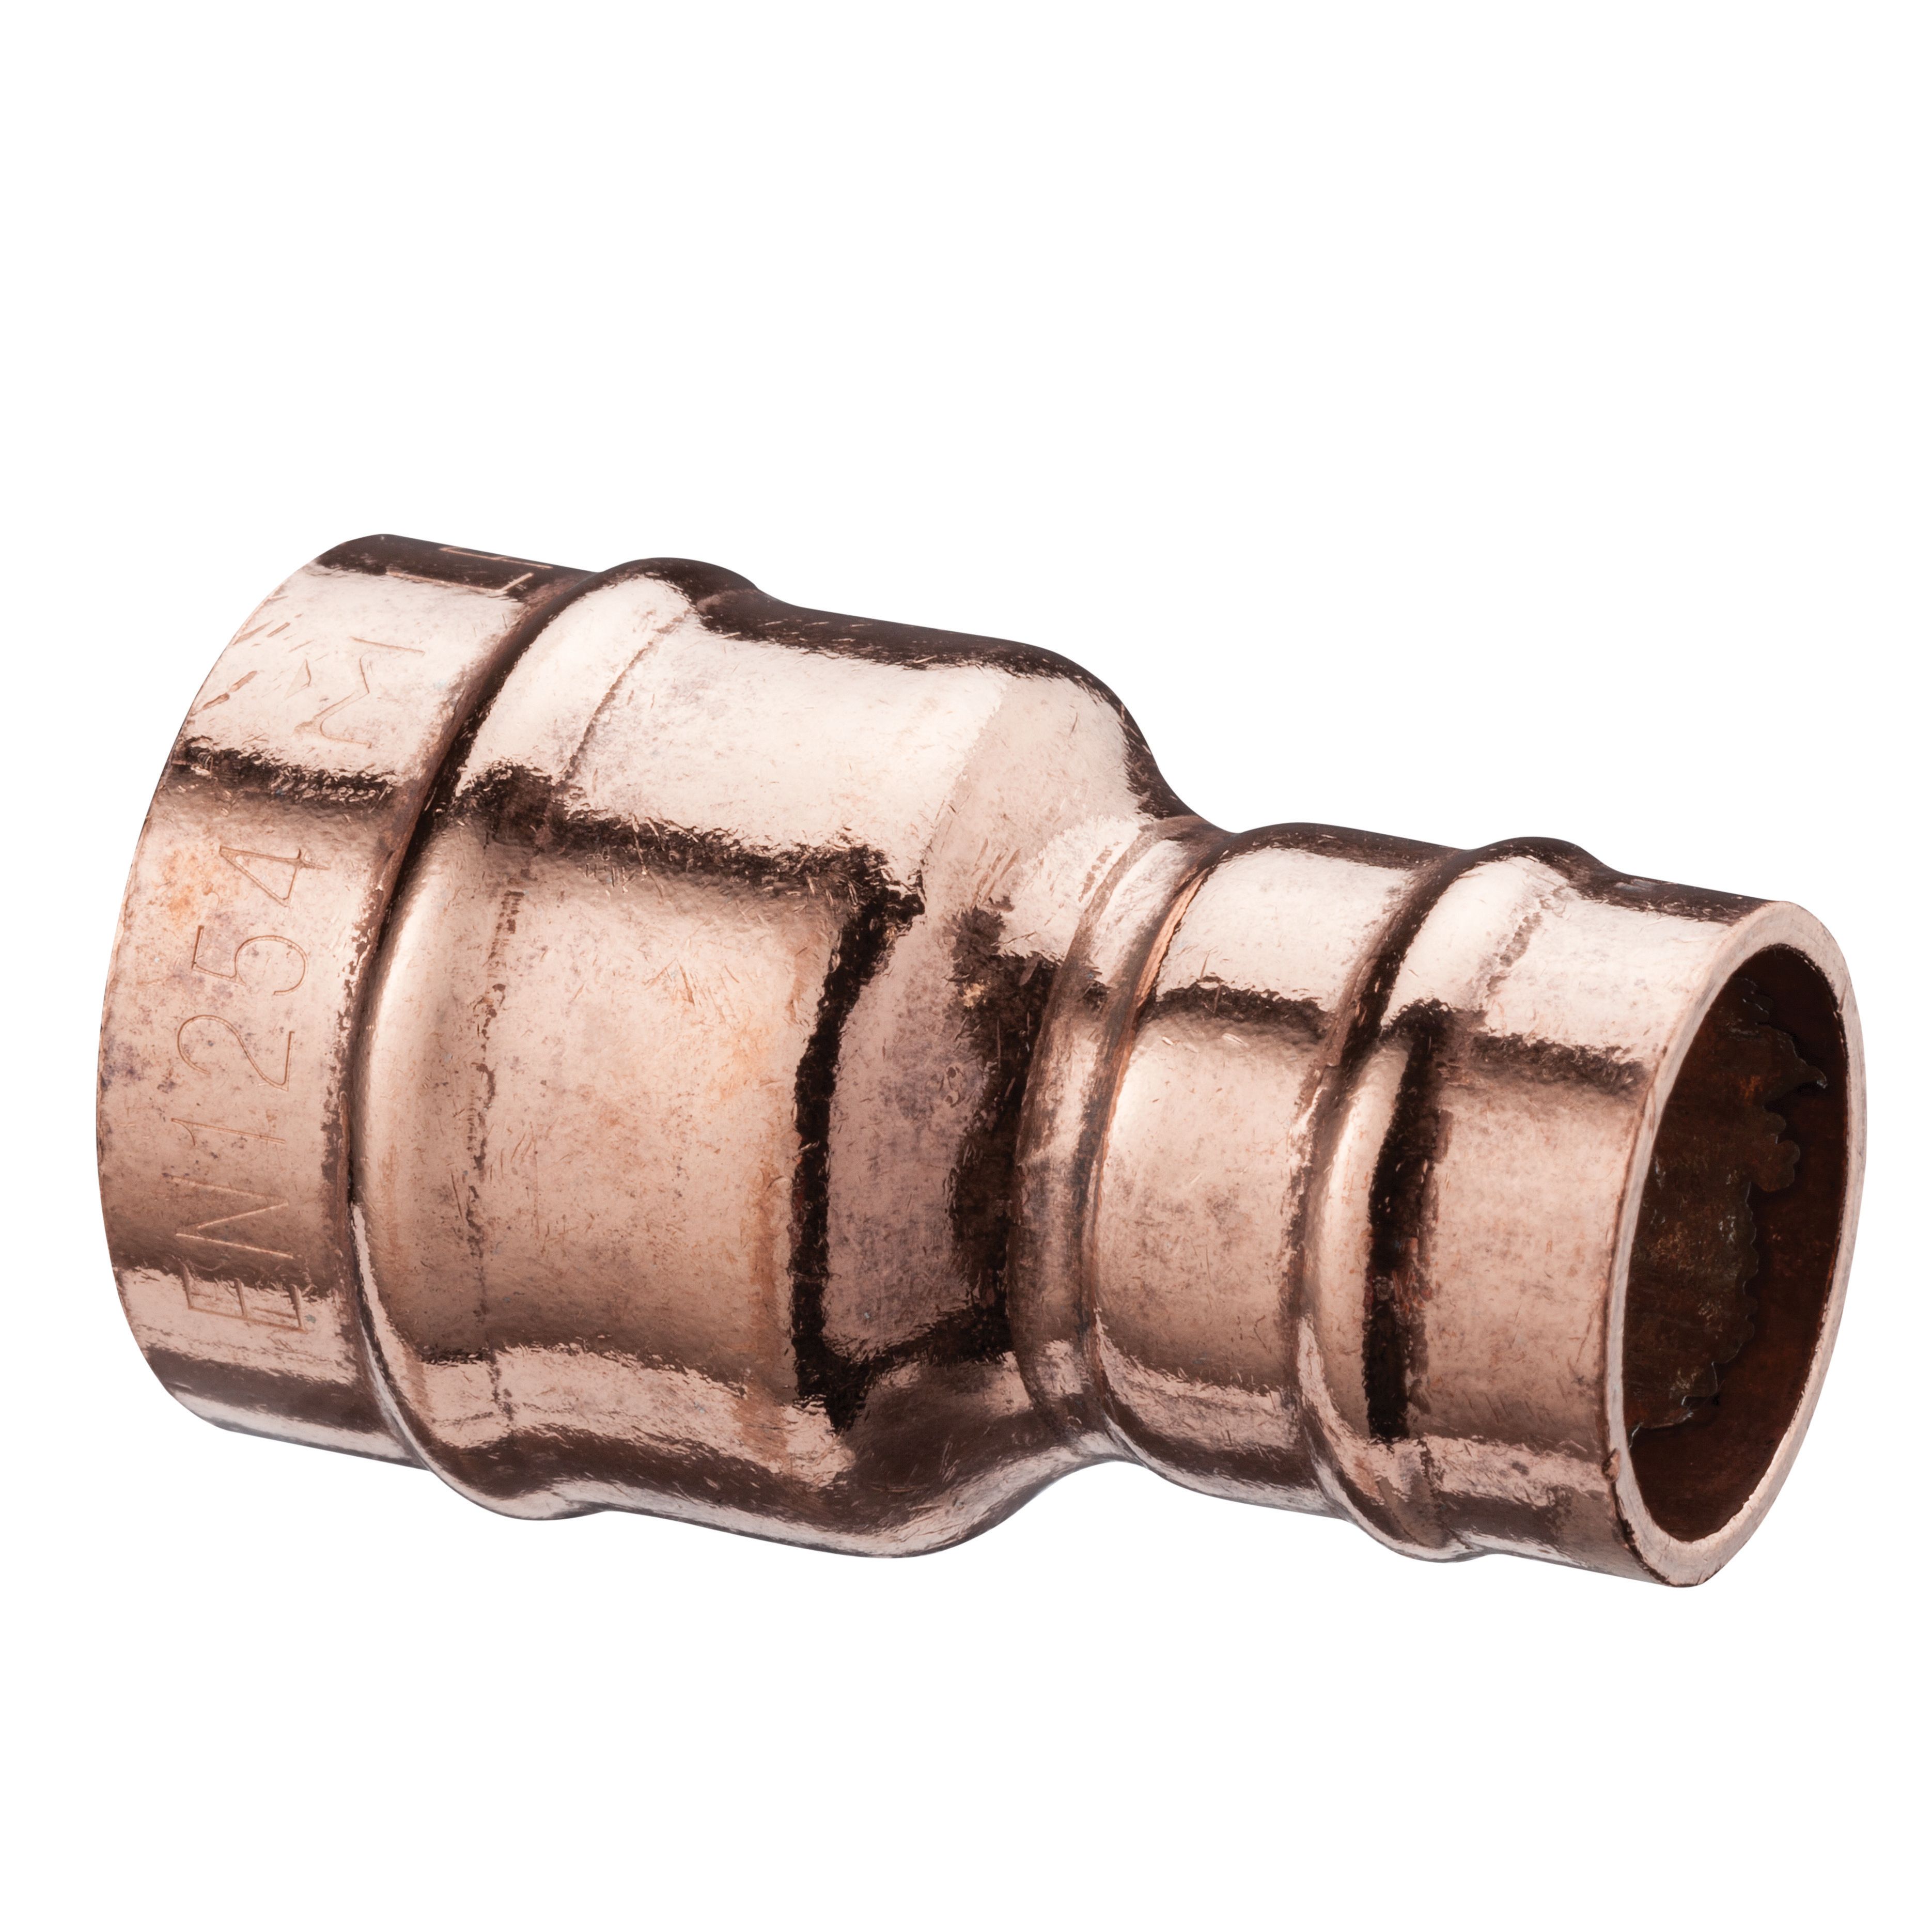 Image of Primaflow Copper Solder Ring Reduced Coupling - 8 X 15mm